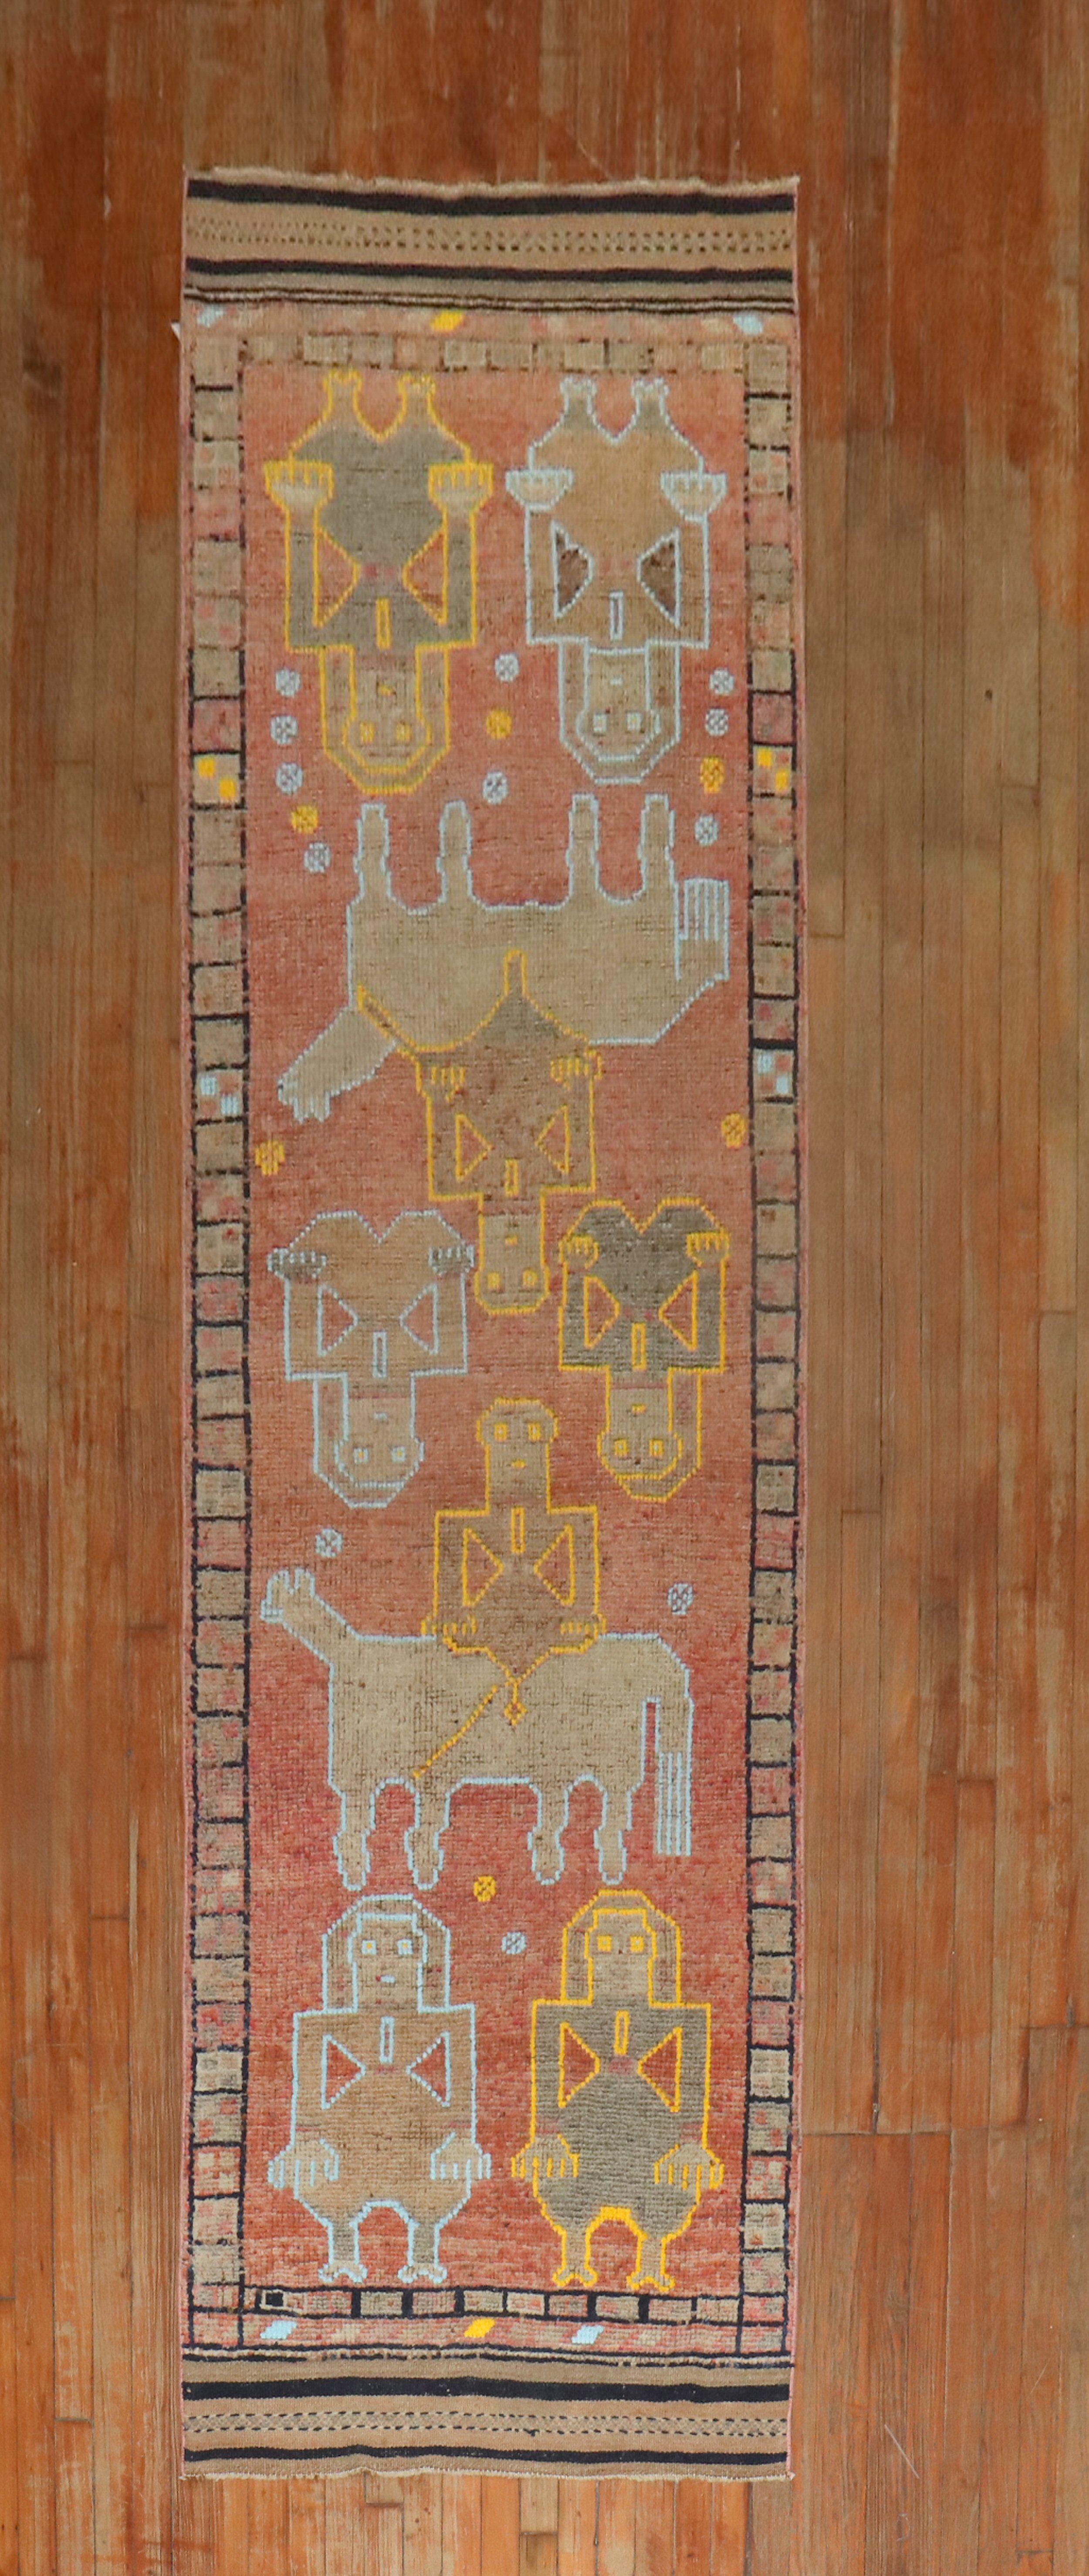 A decorative one of a kind colorful mid 20th-century turkish runner featuring animals and humans

Measures: 3' x 10'11''